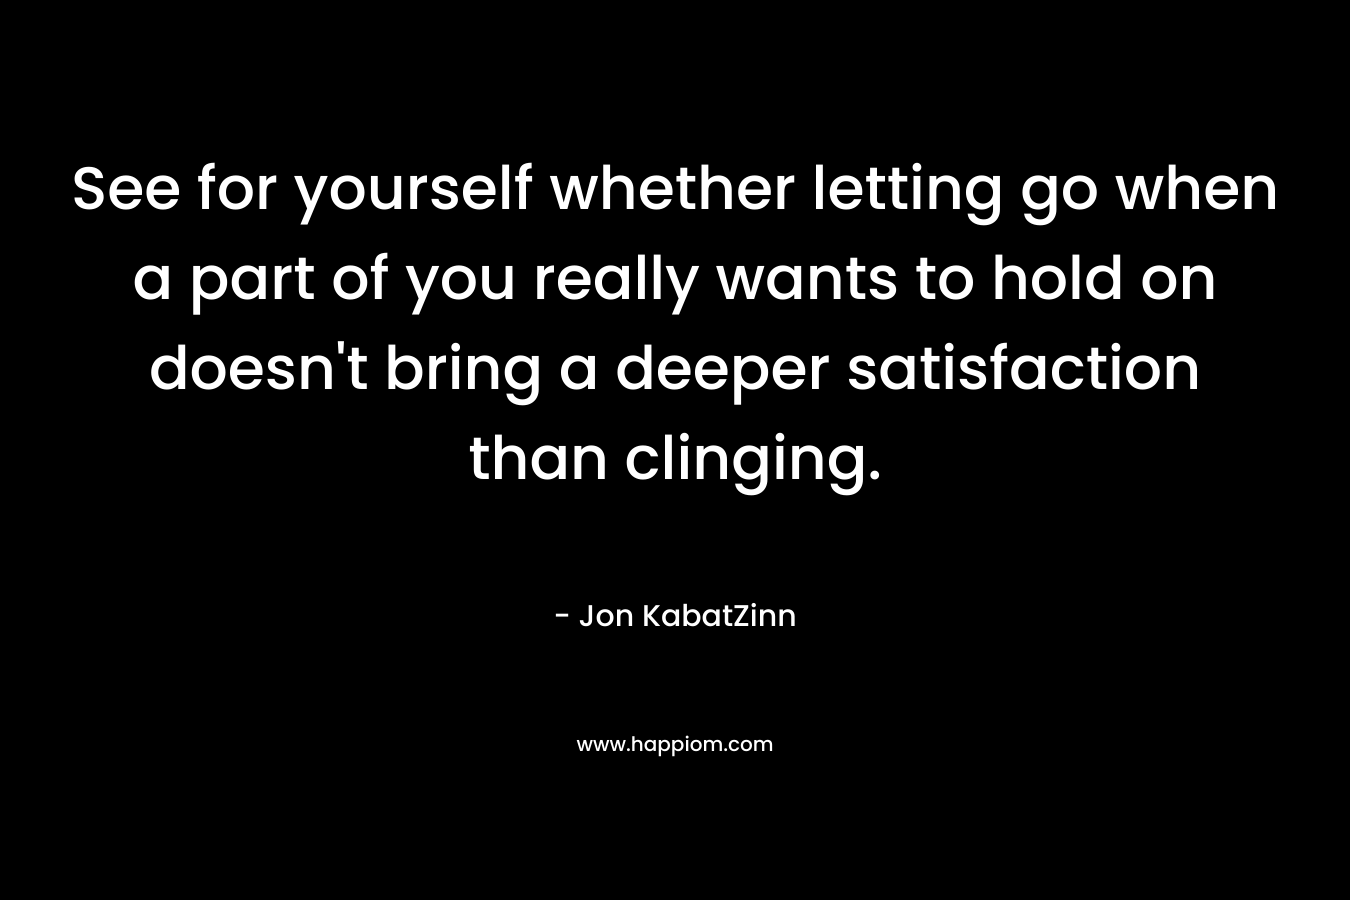 See for yourself whether letting go when a part of you really wants to hold on doesn't bring a deeper satisfaction than clinging.